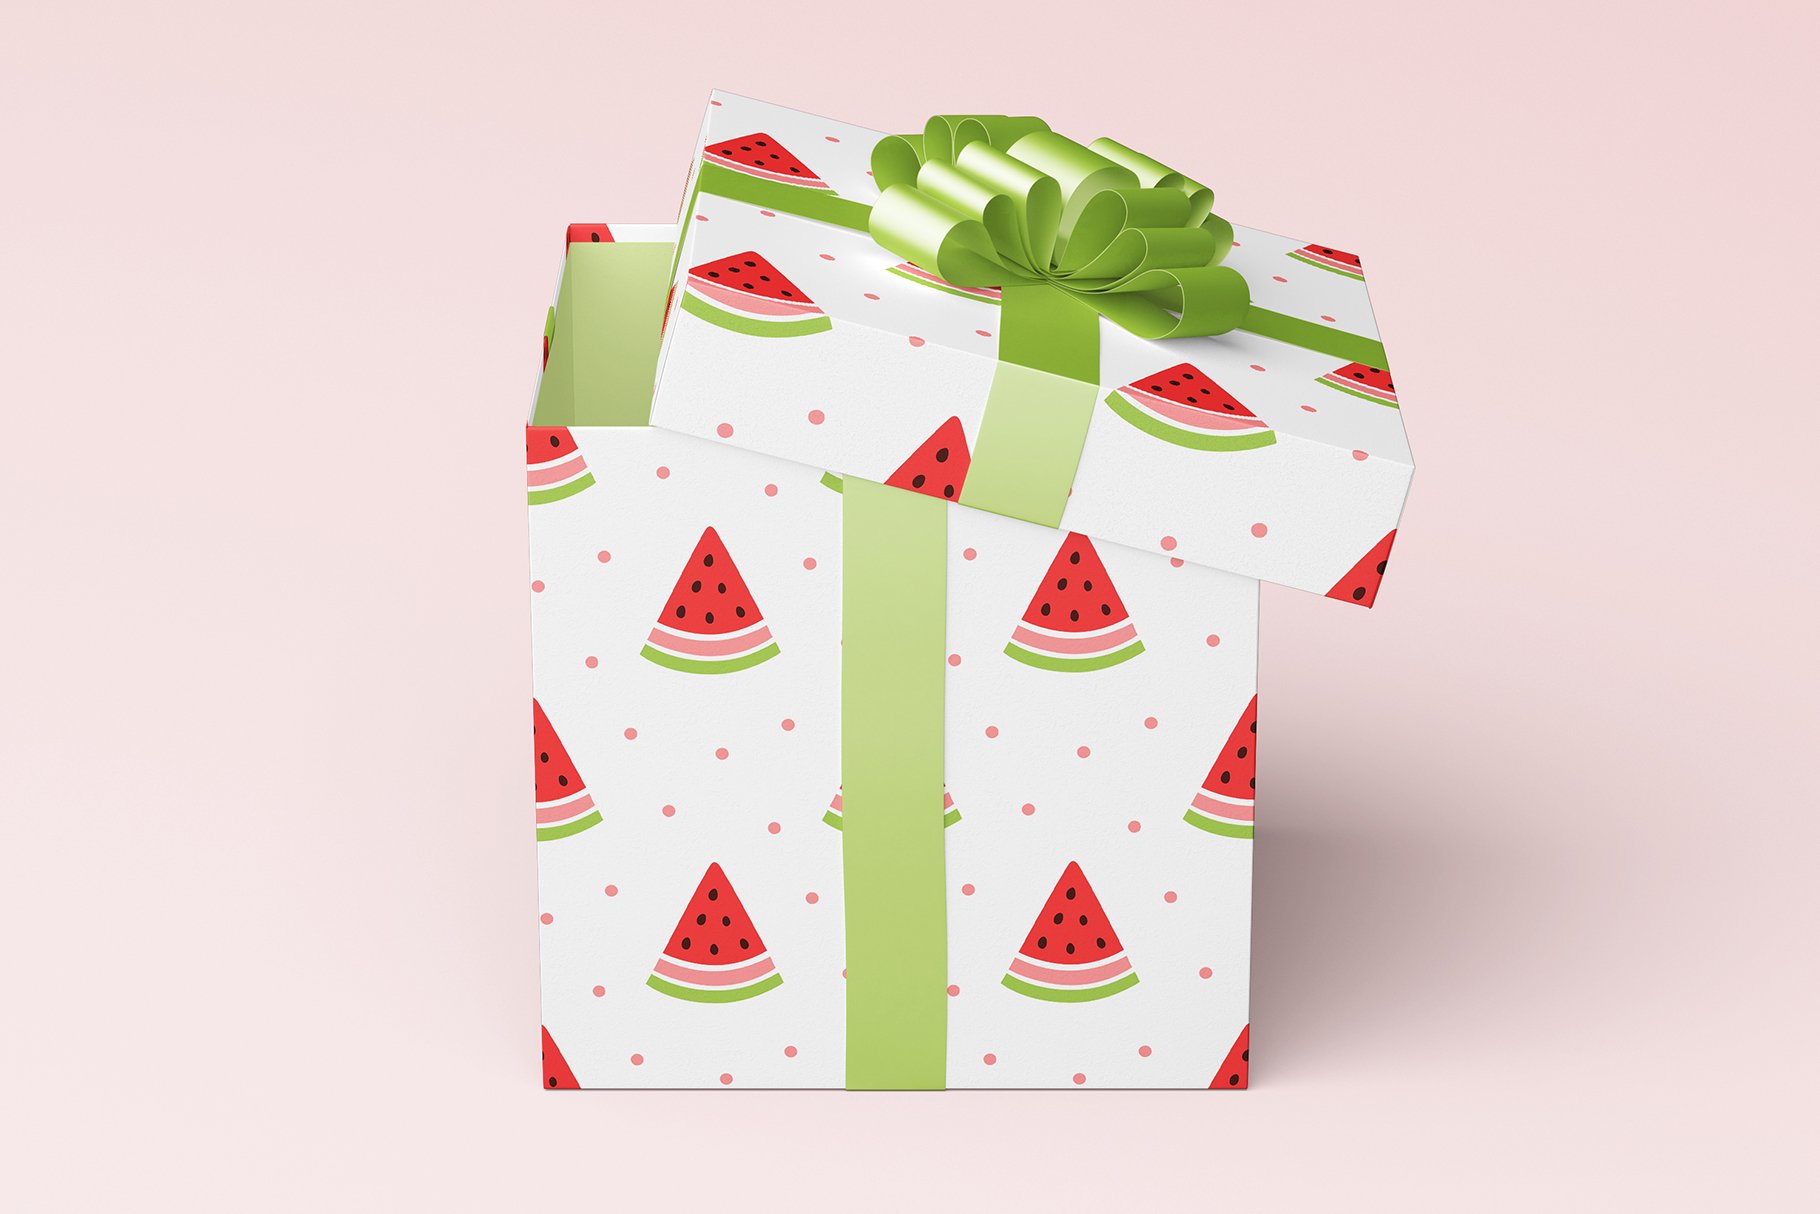 square gift box package mock up 28free29 by massdream 727